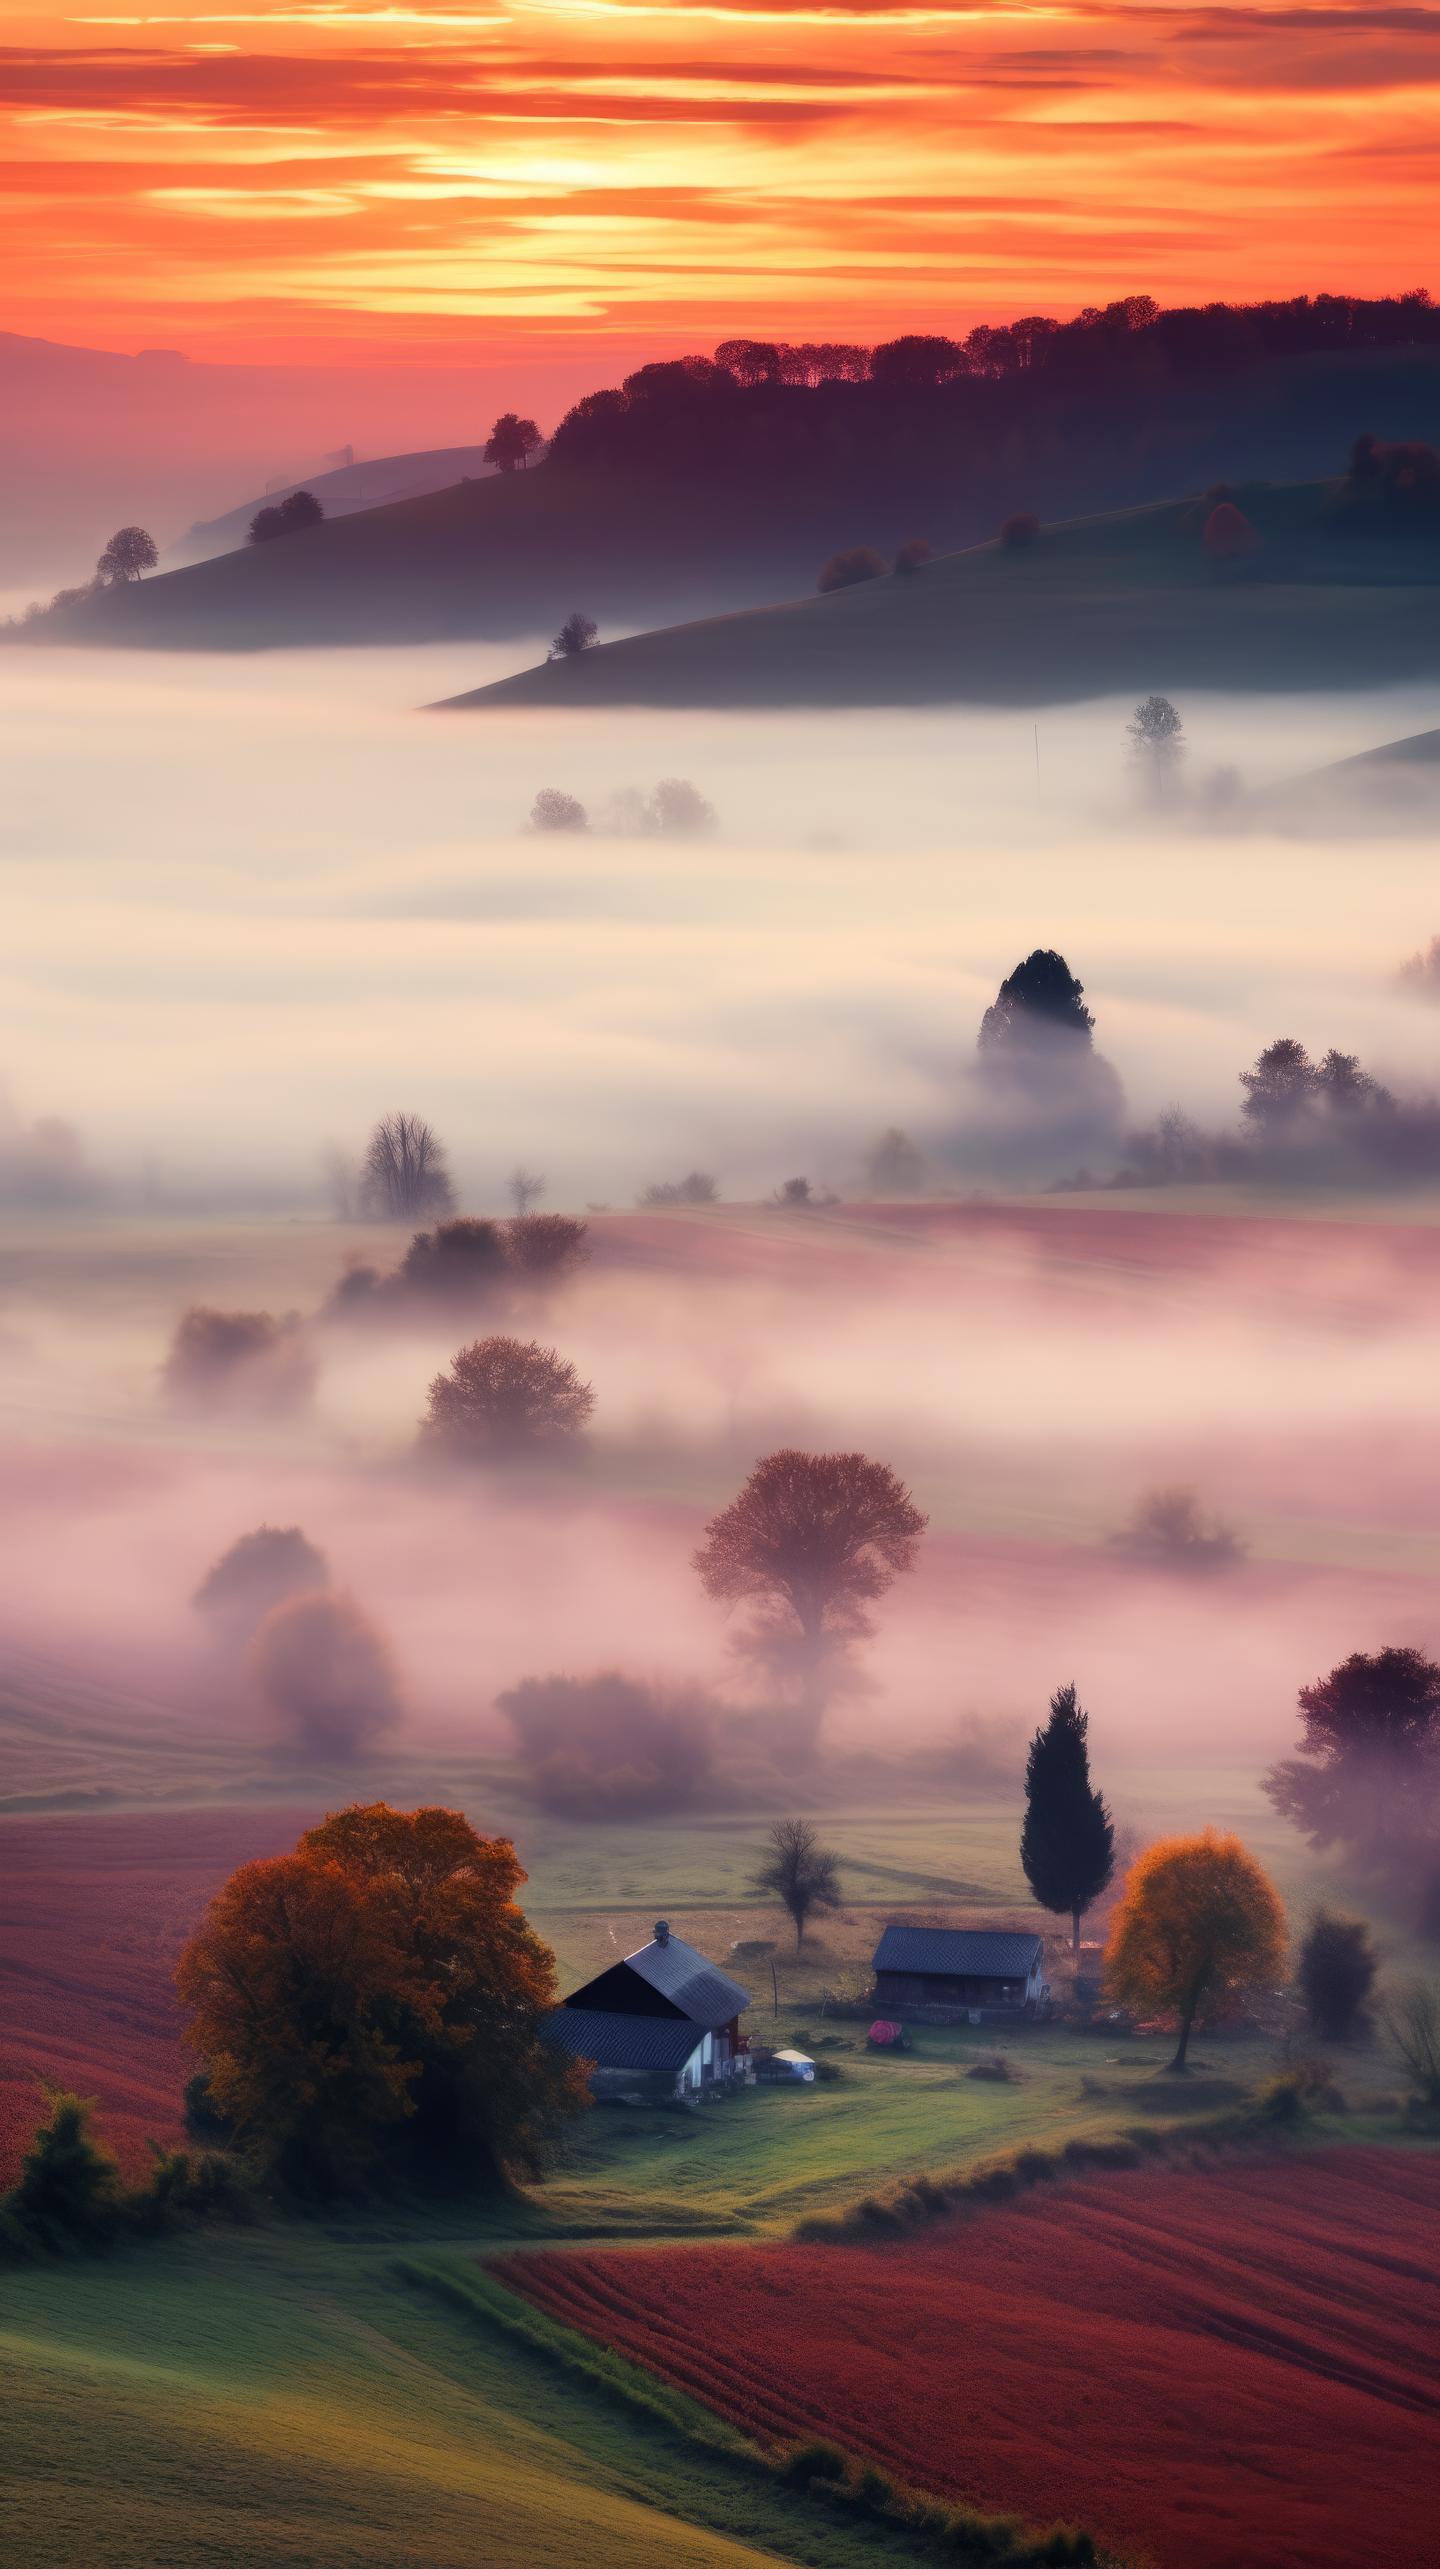 Breathtaking fall landscape phone wallpaper depicting a foggy country scene at sunset with rolling hills and a vibrant sky.